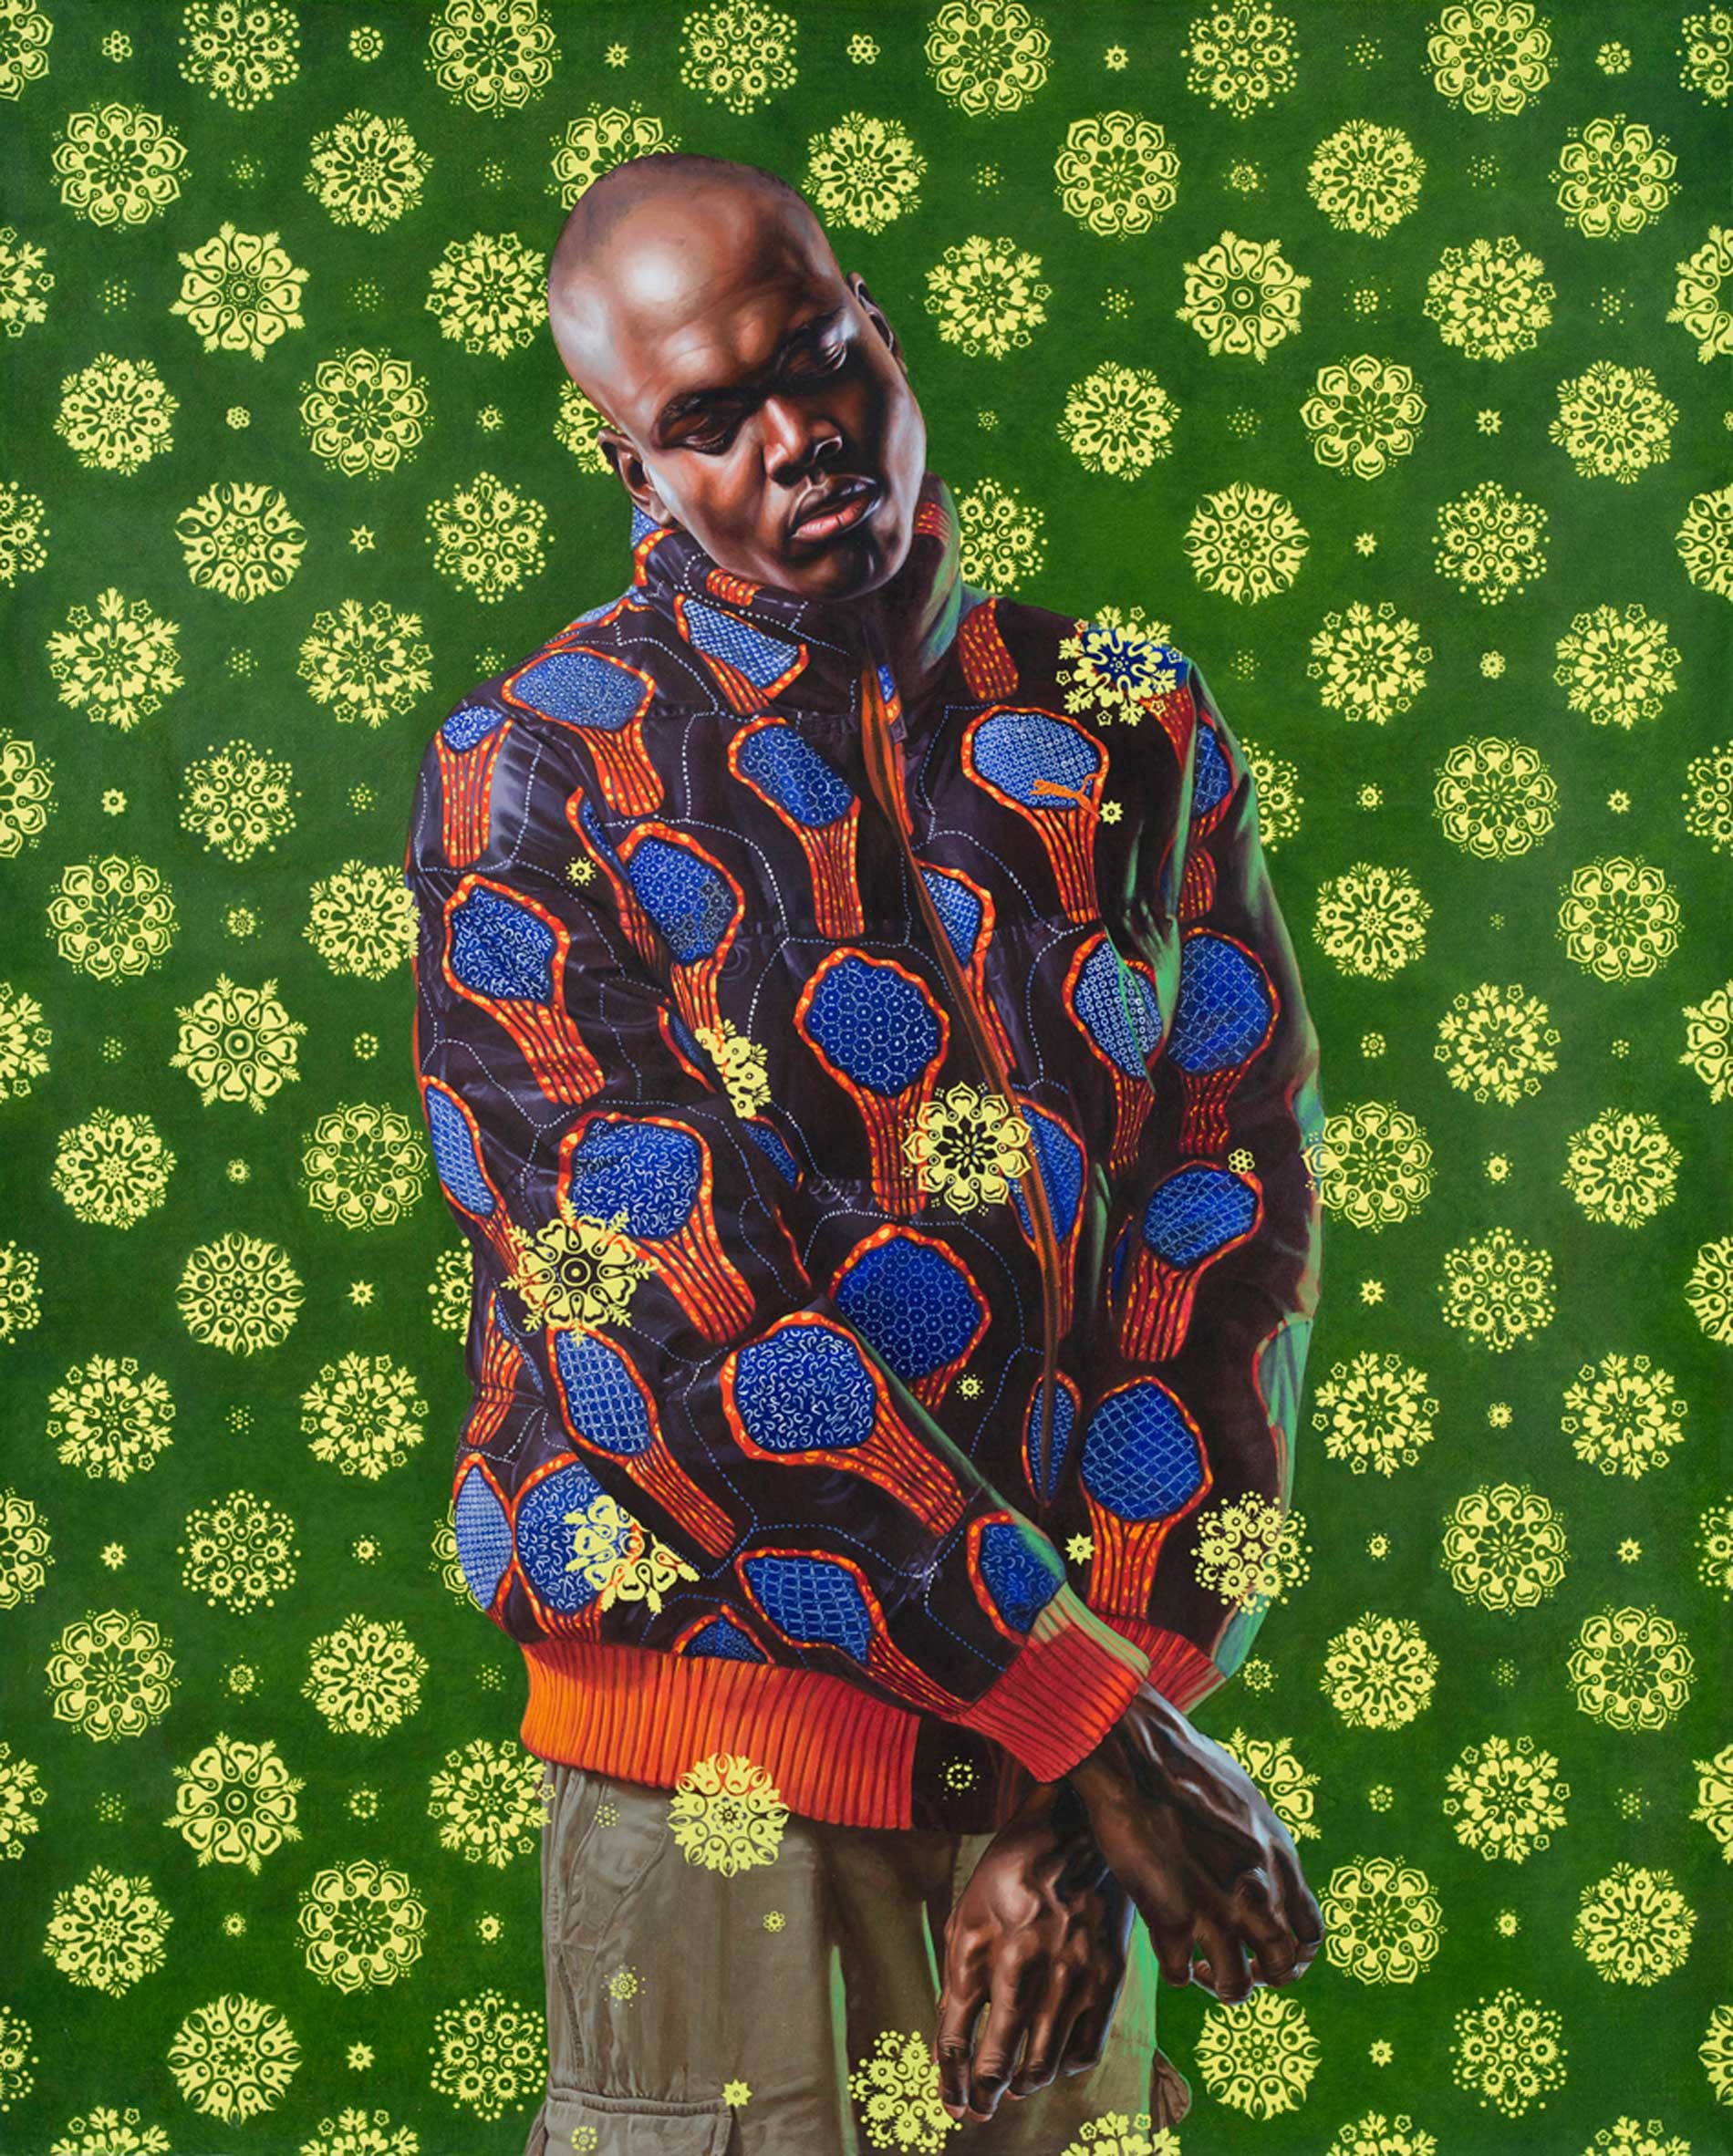 Kehinde Wiley | Selected Works: 2012 | Ecce Homo, 2012, Oil on Canvas. | 1